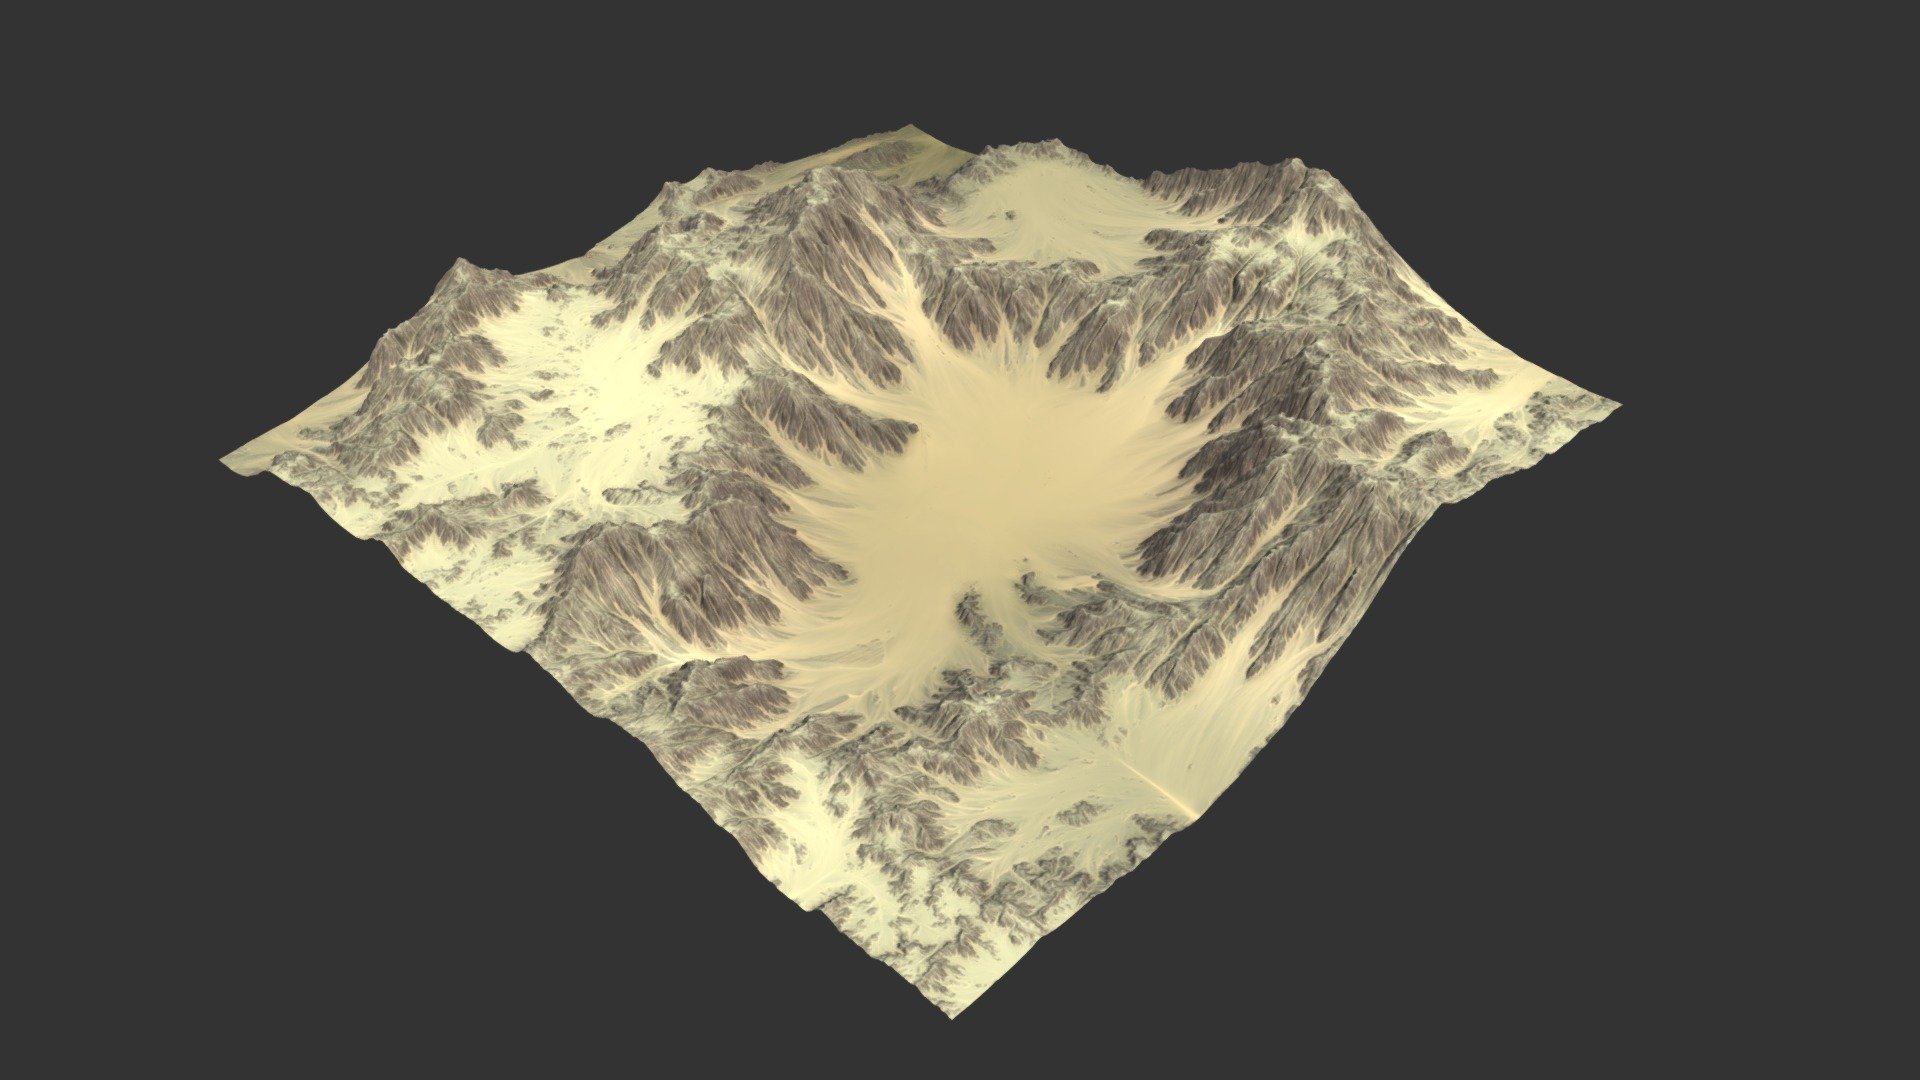 Low poly Realistic Terrain - Game Ready


REALISTIC TERRAIN
POLYCOUNTS:
Hight poly version: 1.000.000 polys
Low poly version: 100.000 poly



TEXTURE:
2 Main channel: Diffuse, Normal
Size: 4096 x 4096
PNG Format



FORMAT:
Fbx (2013), obj, 3ds, 3ds Max.



CONVENIENCE:
The product includes hight-poly and low-poly, suitable for any type of project (high quality rendered, or VR games).
Texture 4k, you can use immediately for use in the project, or can resize to fit your own requirements.



CONCEPT DESIGN:
Used for large terrains, natural environment, mountain and forest, etc.
In our range of terrain products, it covers a wide variety of terrains, desert, swamp, land, islands, hills, etc.
and the fantasy terrain &hellip;



THANKS FOR INTEREST! - Terrain 002 - 3D model by josluat91 3d model